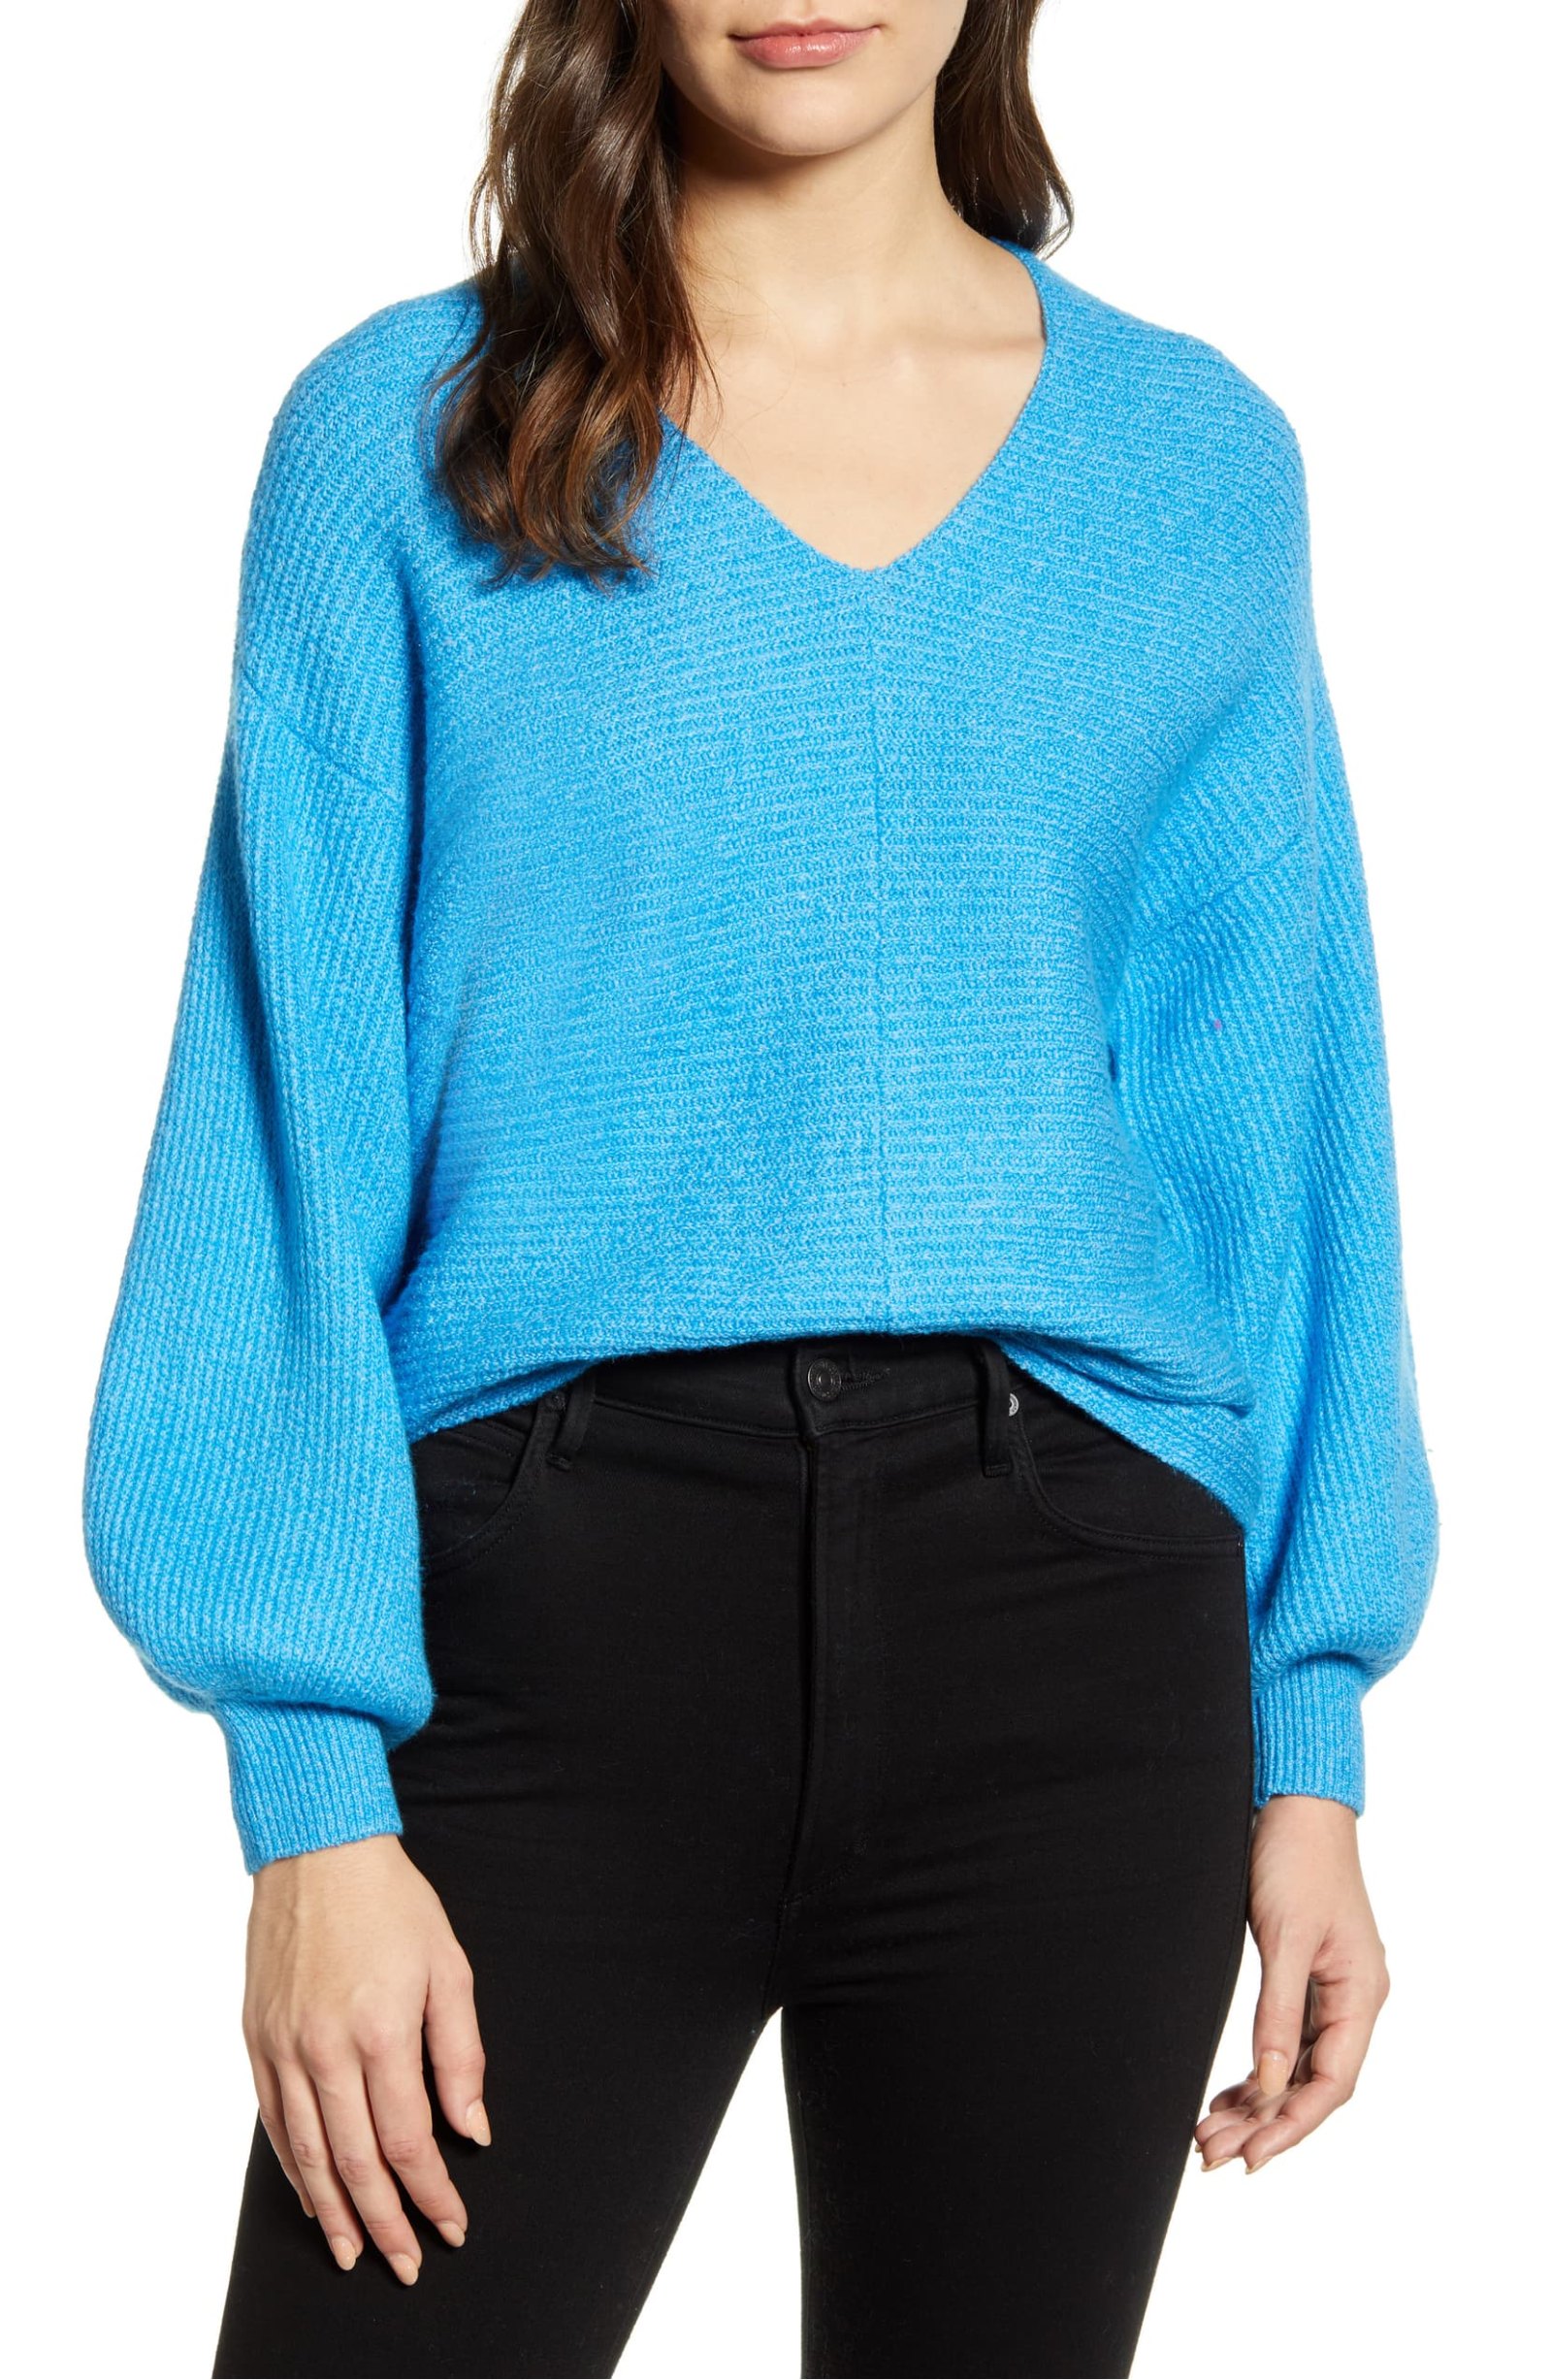 This Nordstrom Sweater Is an Instant Winter Wardrobe Classic | Us Weekly